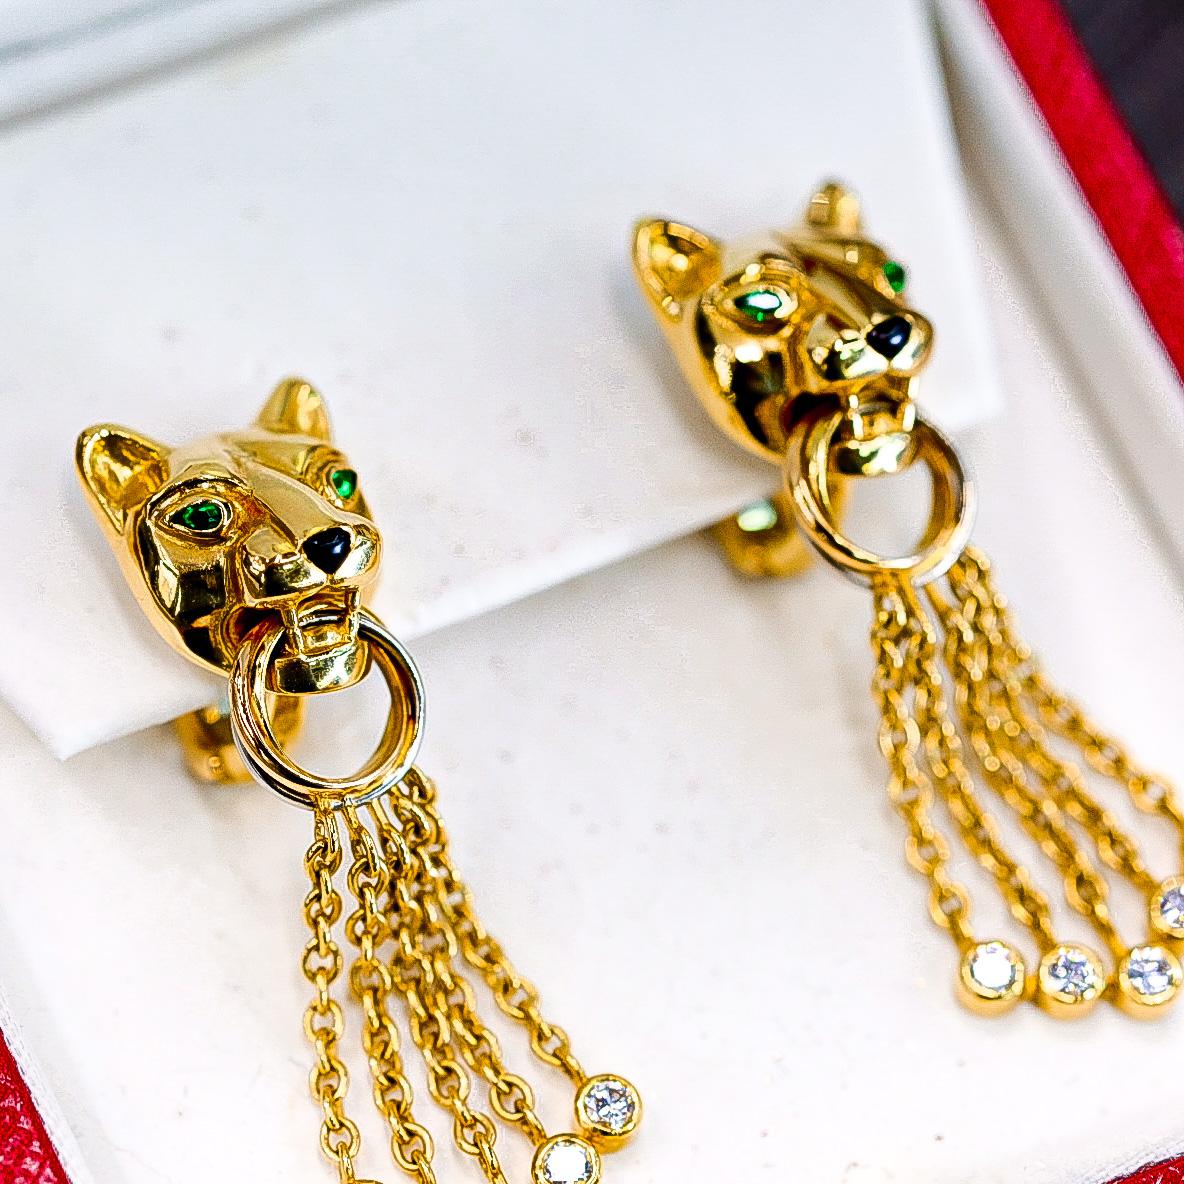 Diamond, Emerald, Onyx and Yellow Gold Bead ‘Panthère’ Earrings, Cartier.

Cartier’s first use of the panther motif was a 1914 watch with diamonds and onyx set in platinum. The panther has been an enduring symbol of the house ever since, and these